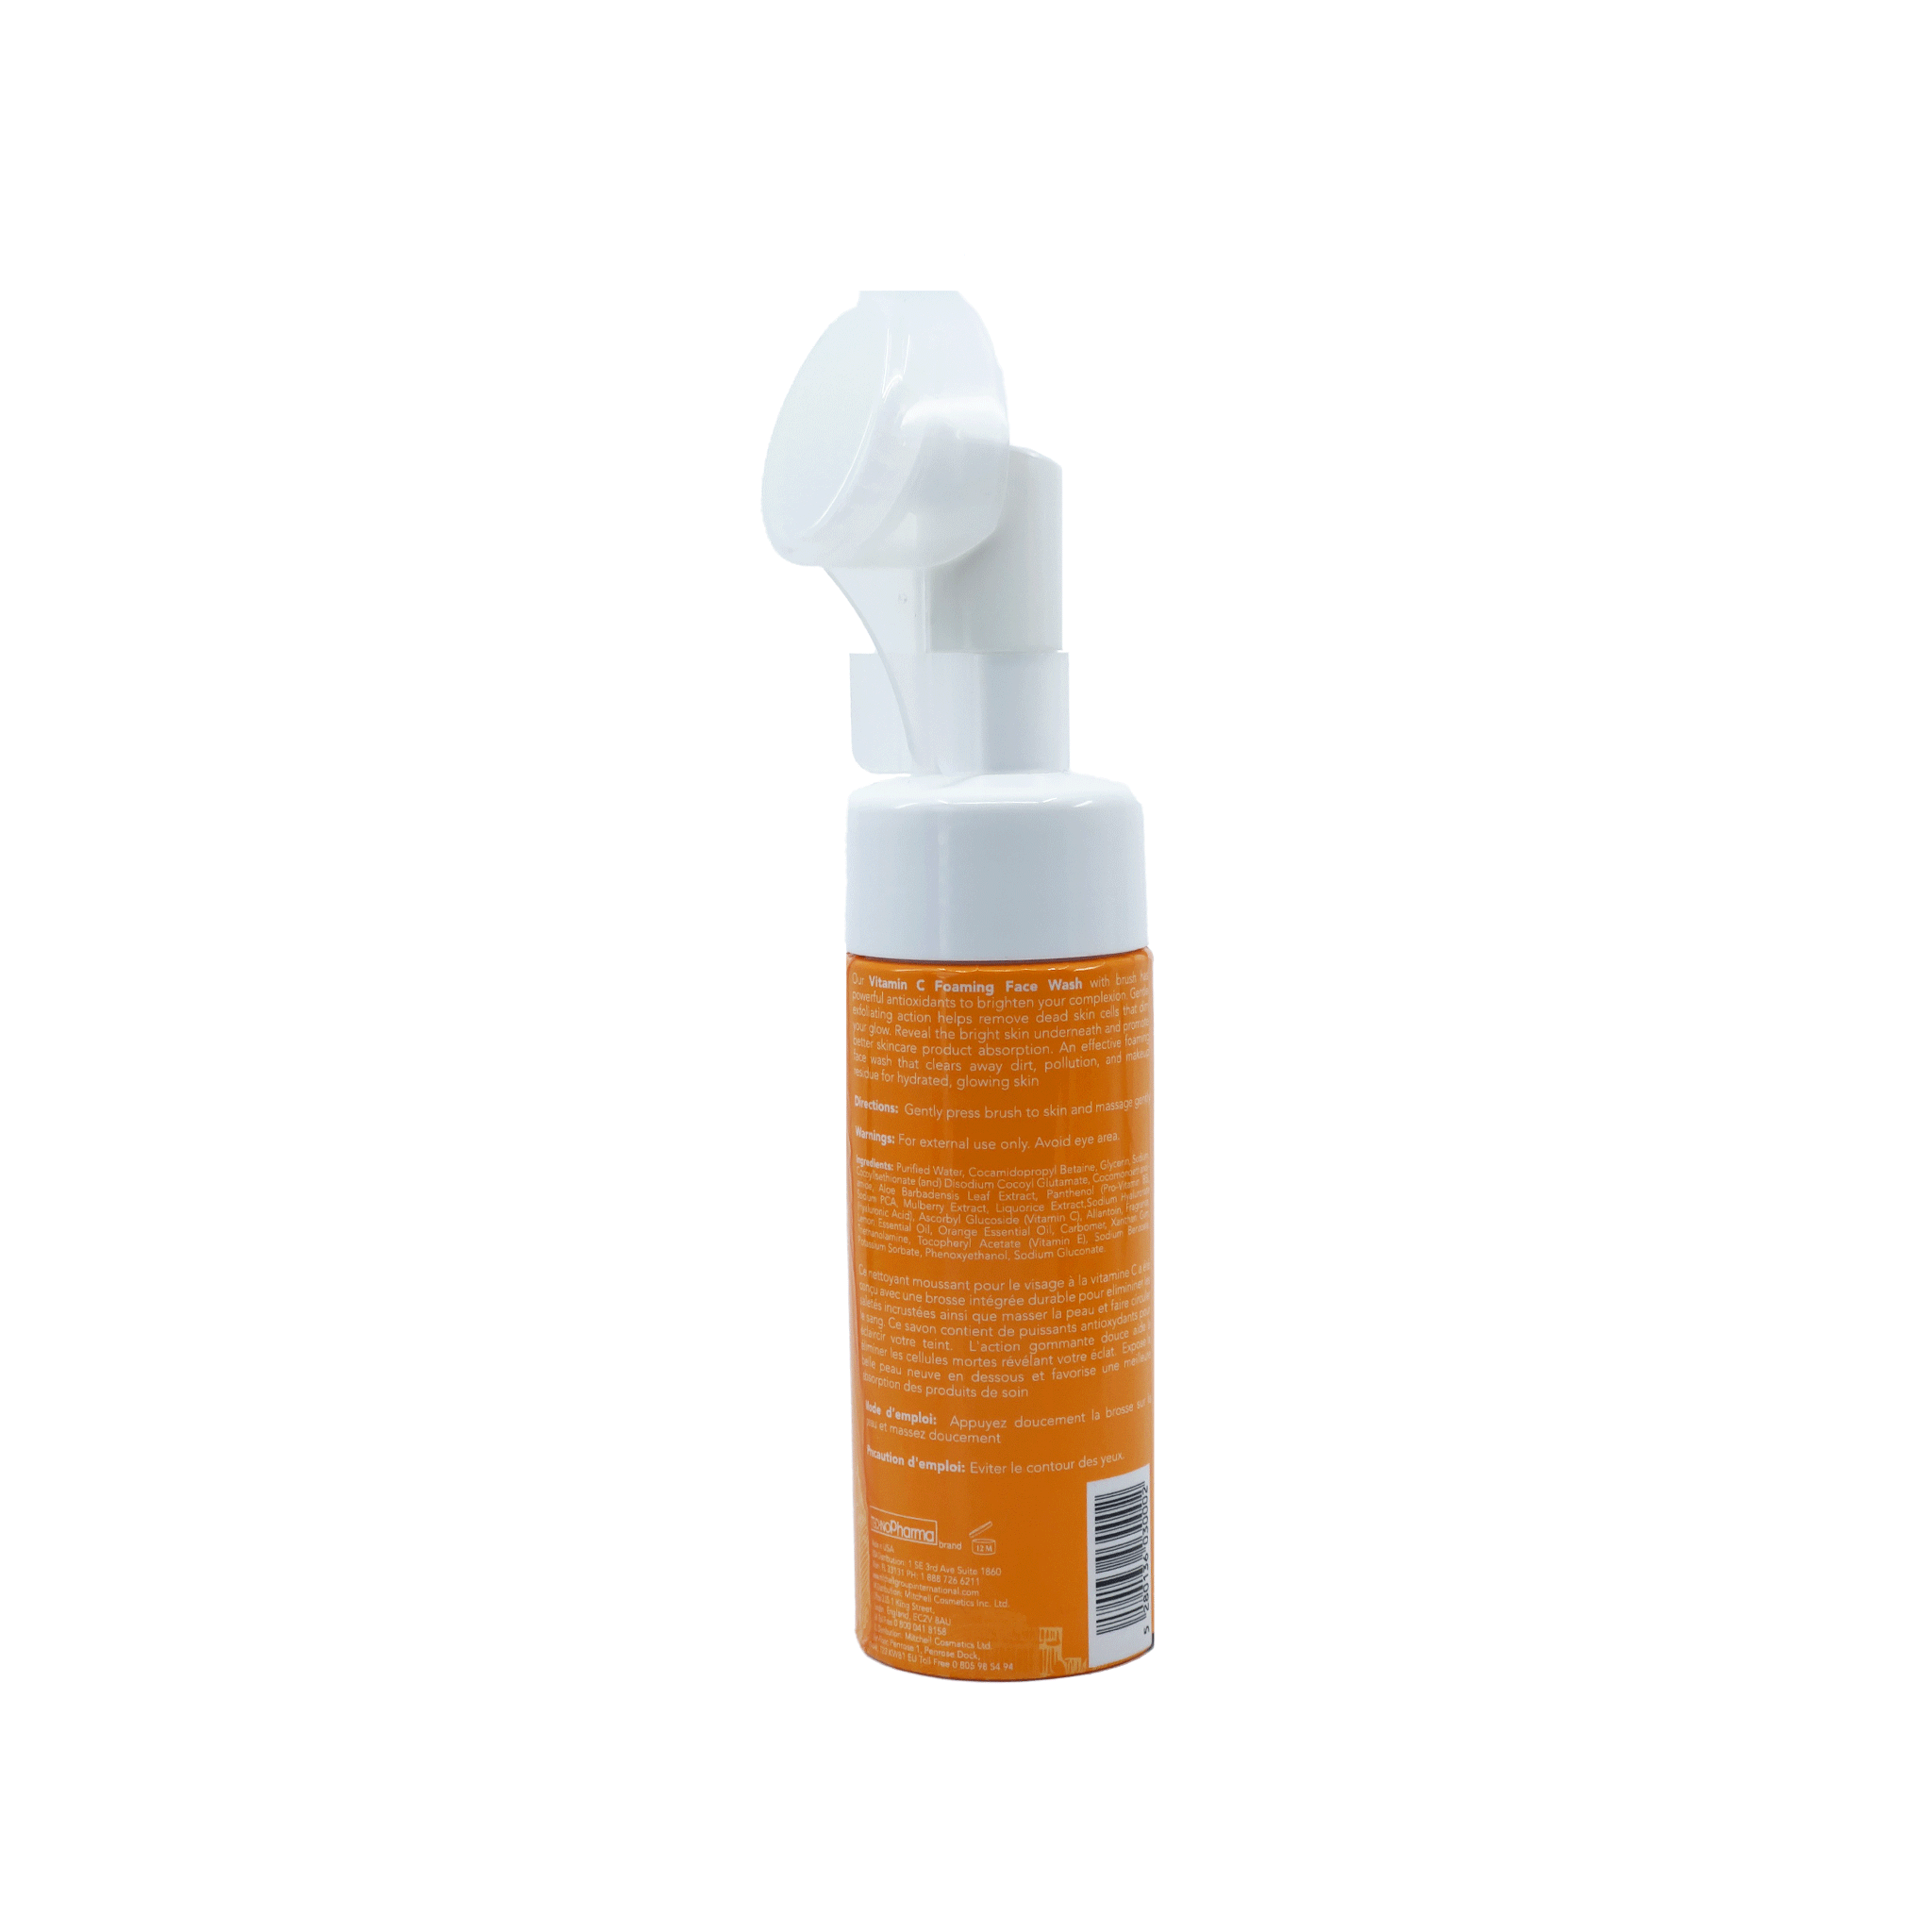 New York Bright & Lovely Foaming Wash with Vit C 150ml